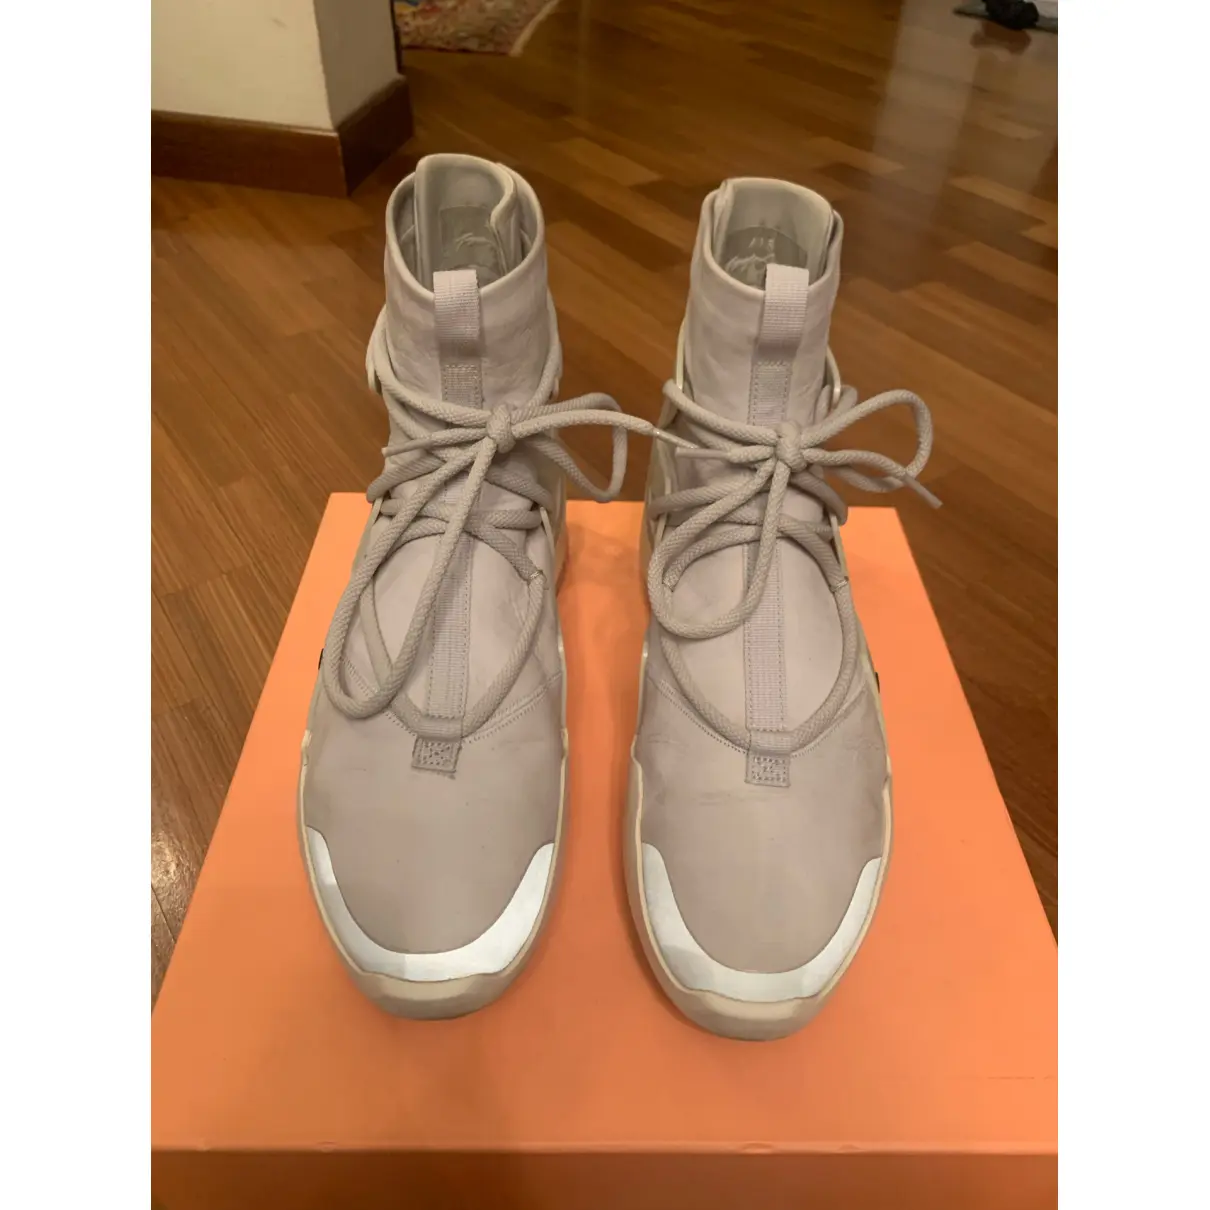 1 leather high trainers Nike x Fear of God